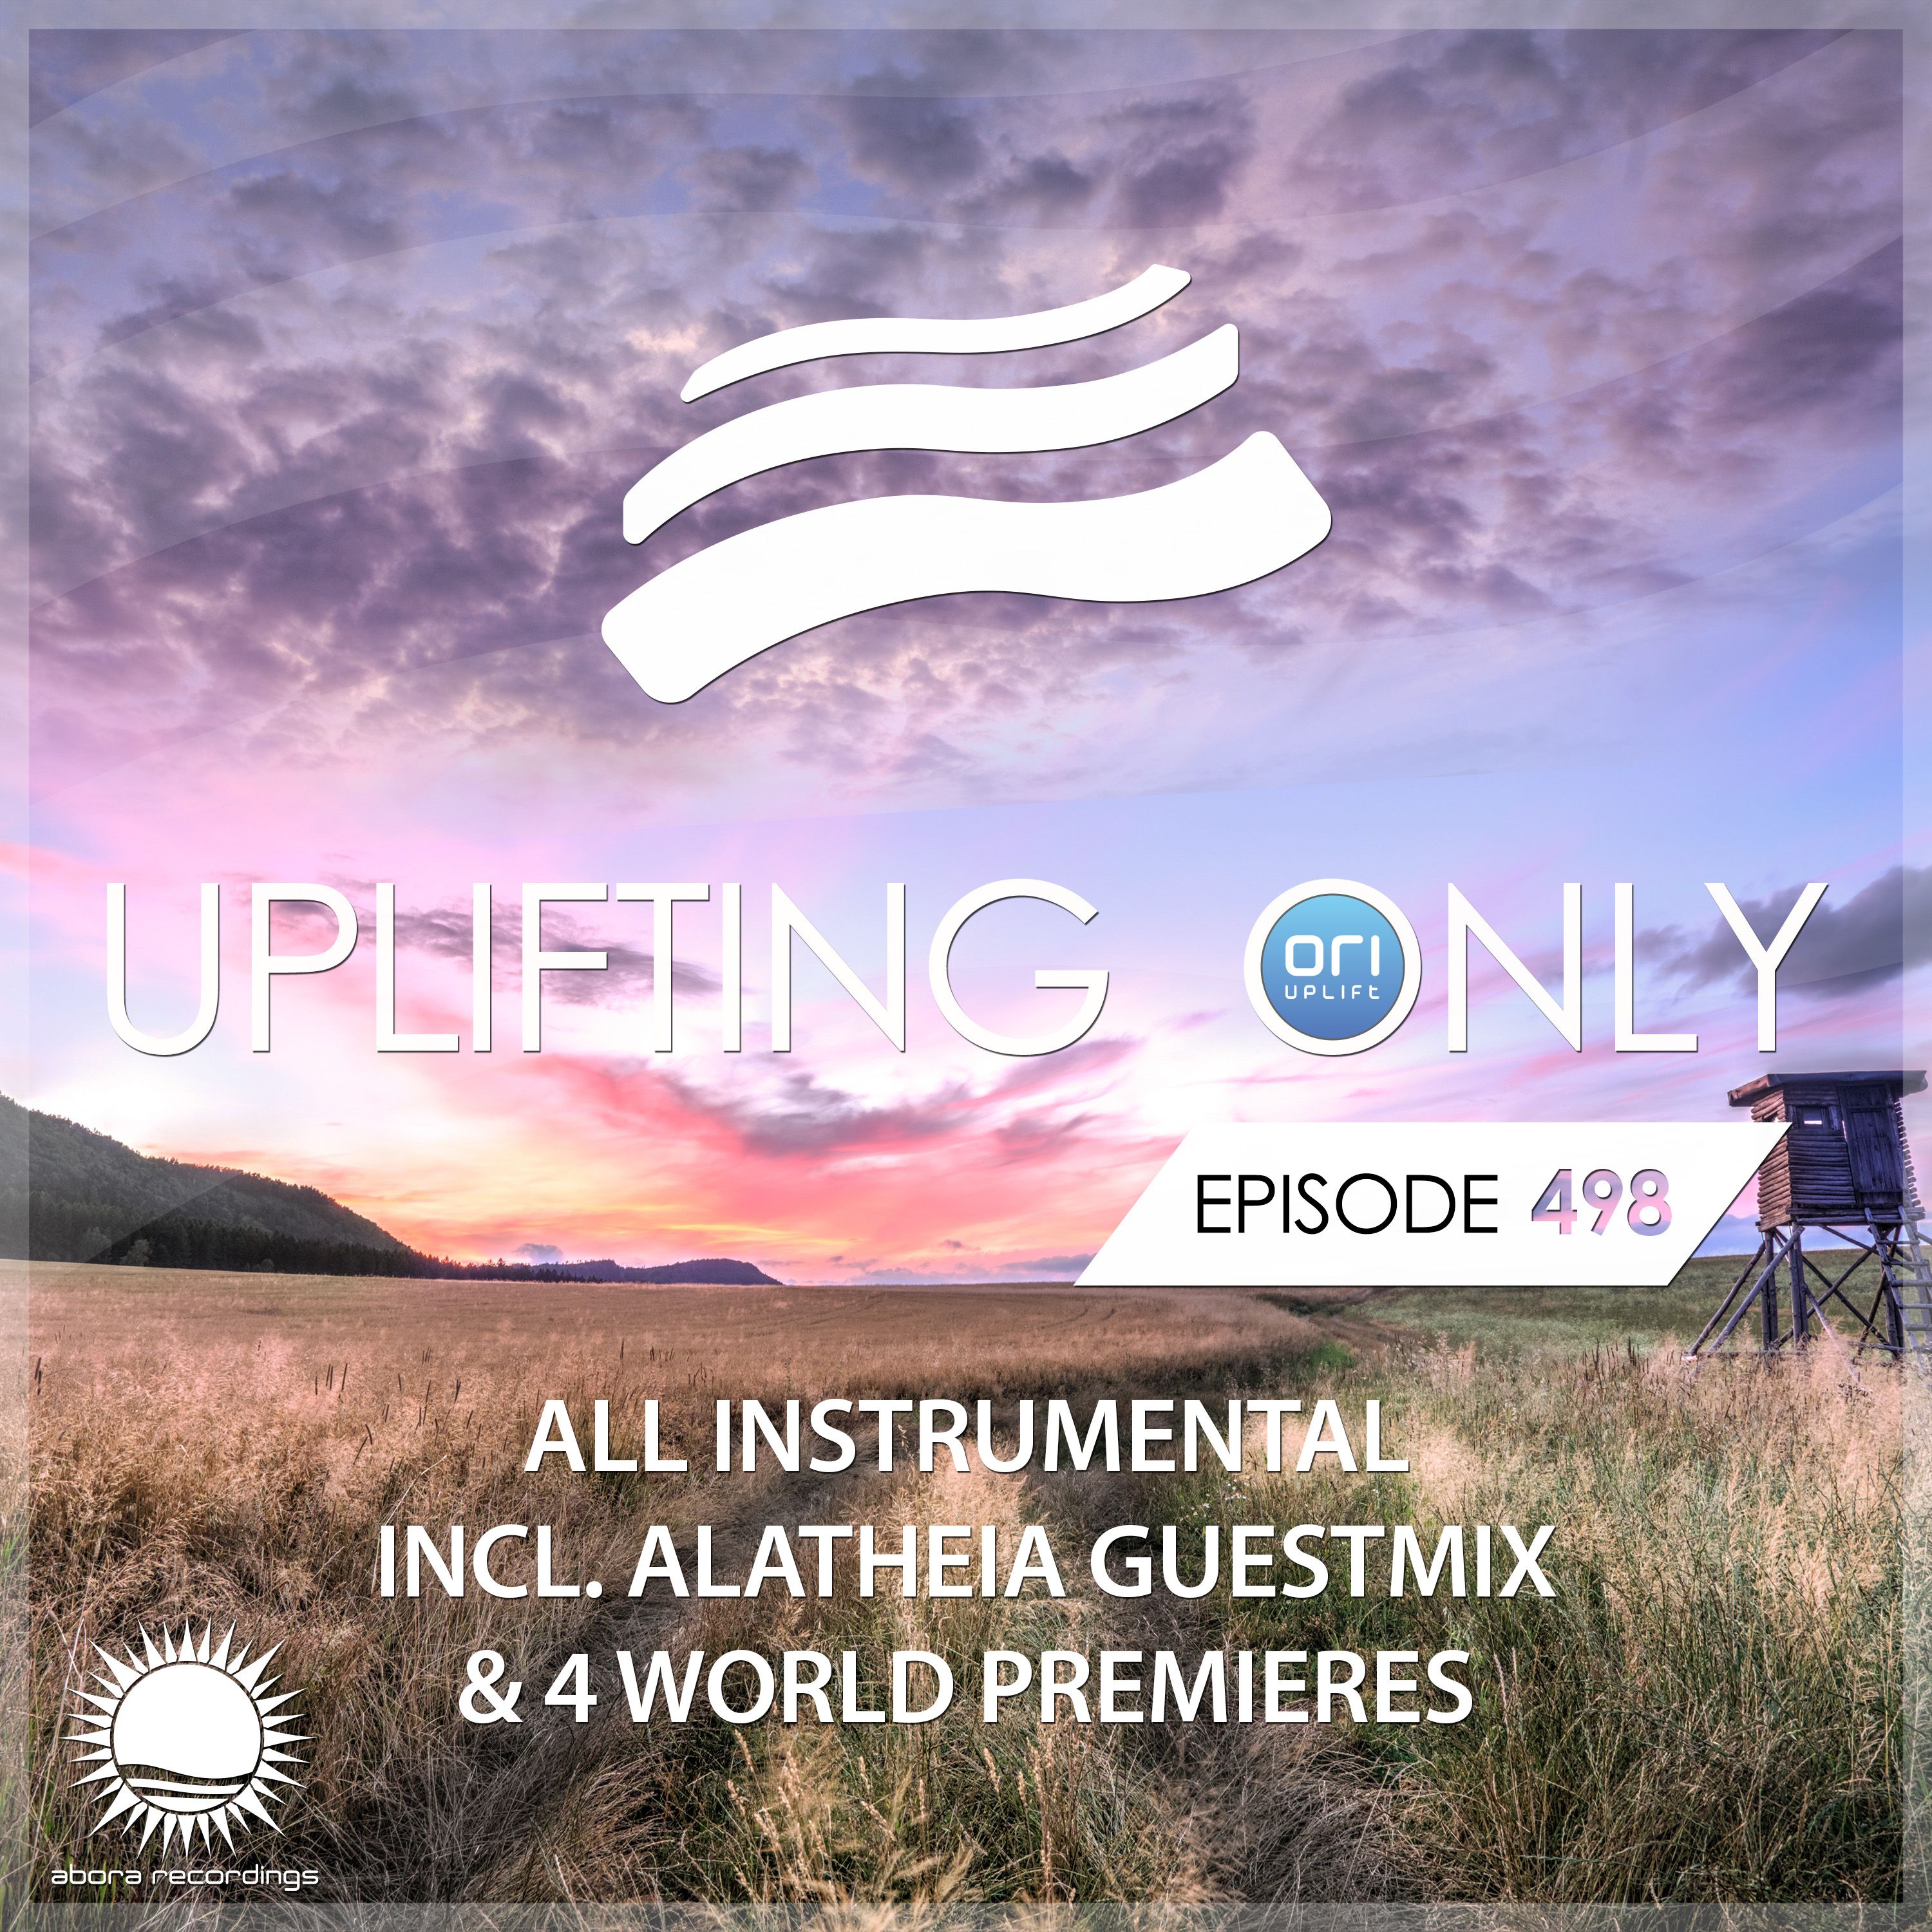 Uplifting Only 498 (incl. Alatheia Guestmix) [All Instrumental] (Aug 25, 2022) [wav]